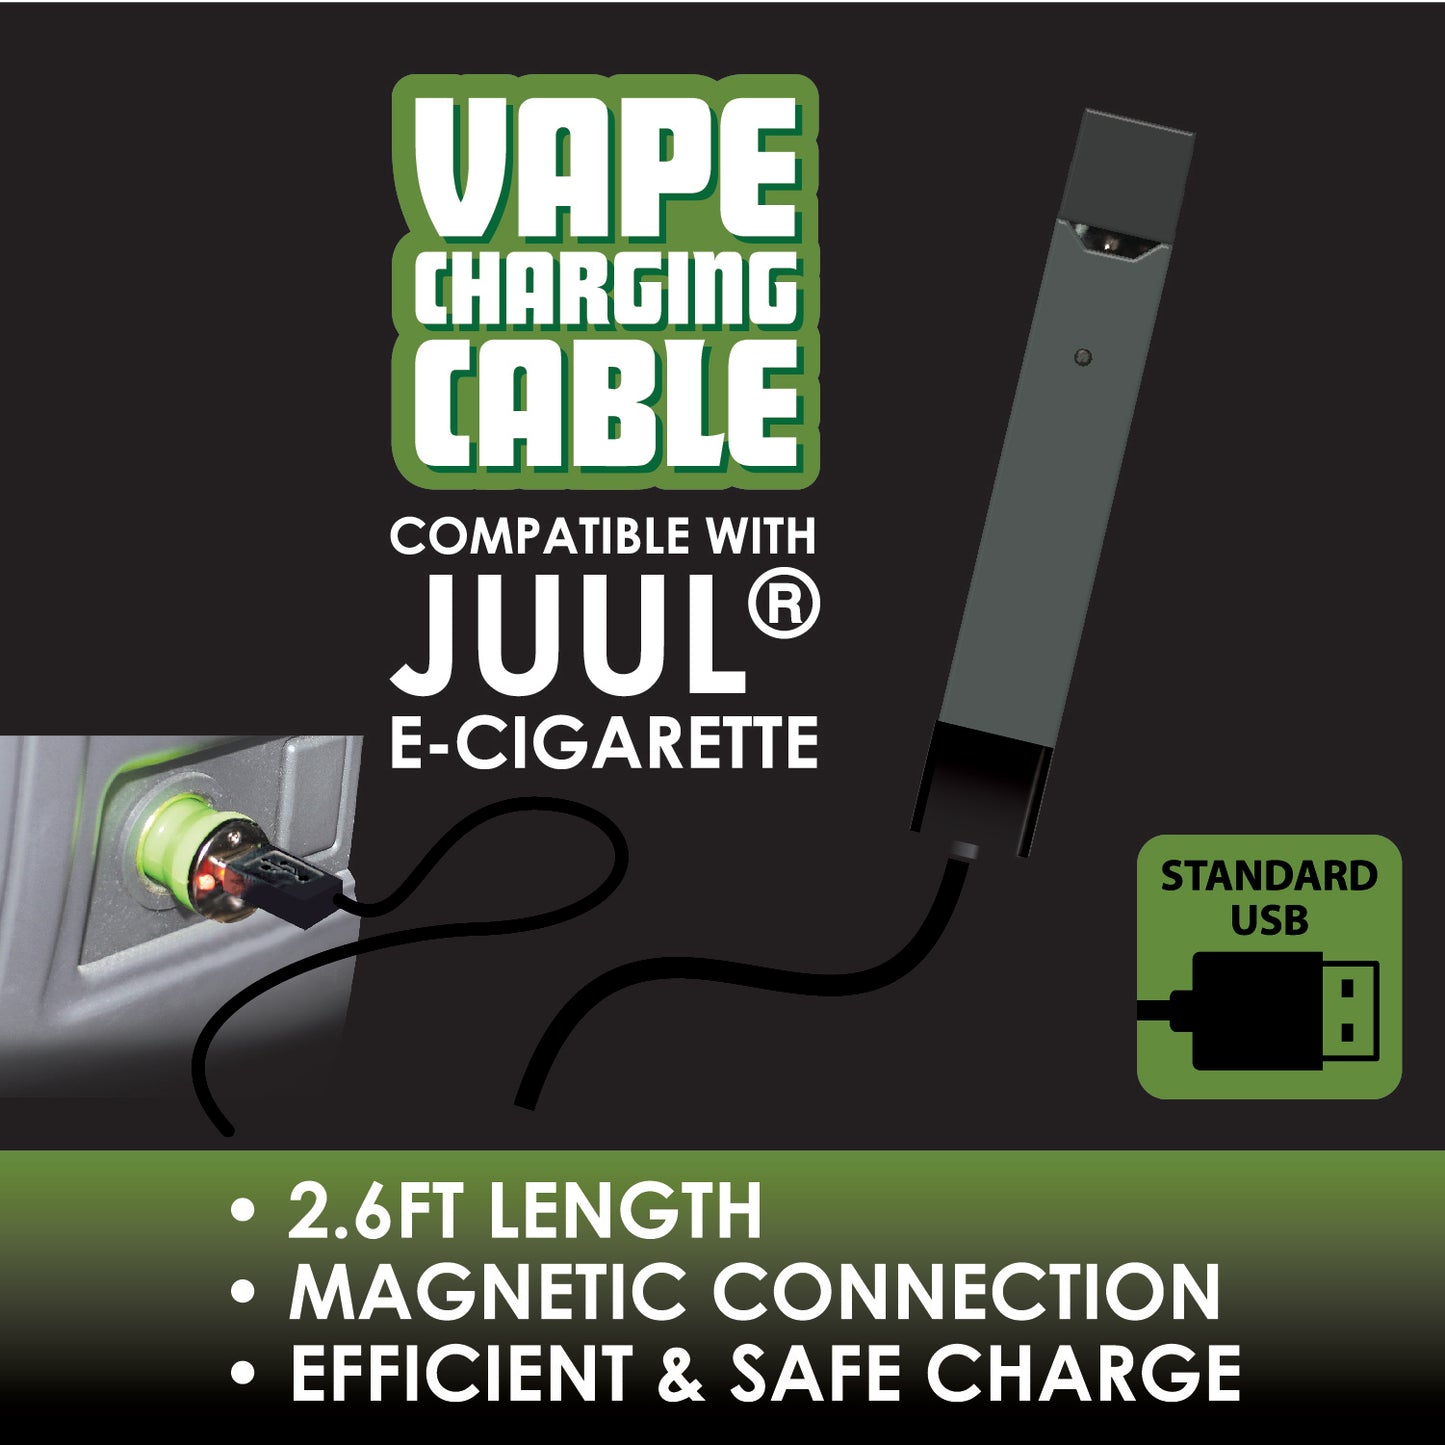 ITEM NUMBER 025986 VAPE CHARGING CABLE 6 PIECES PER DISPLAY